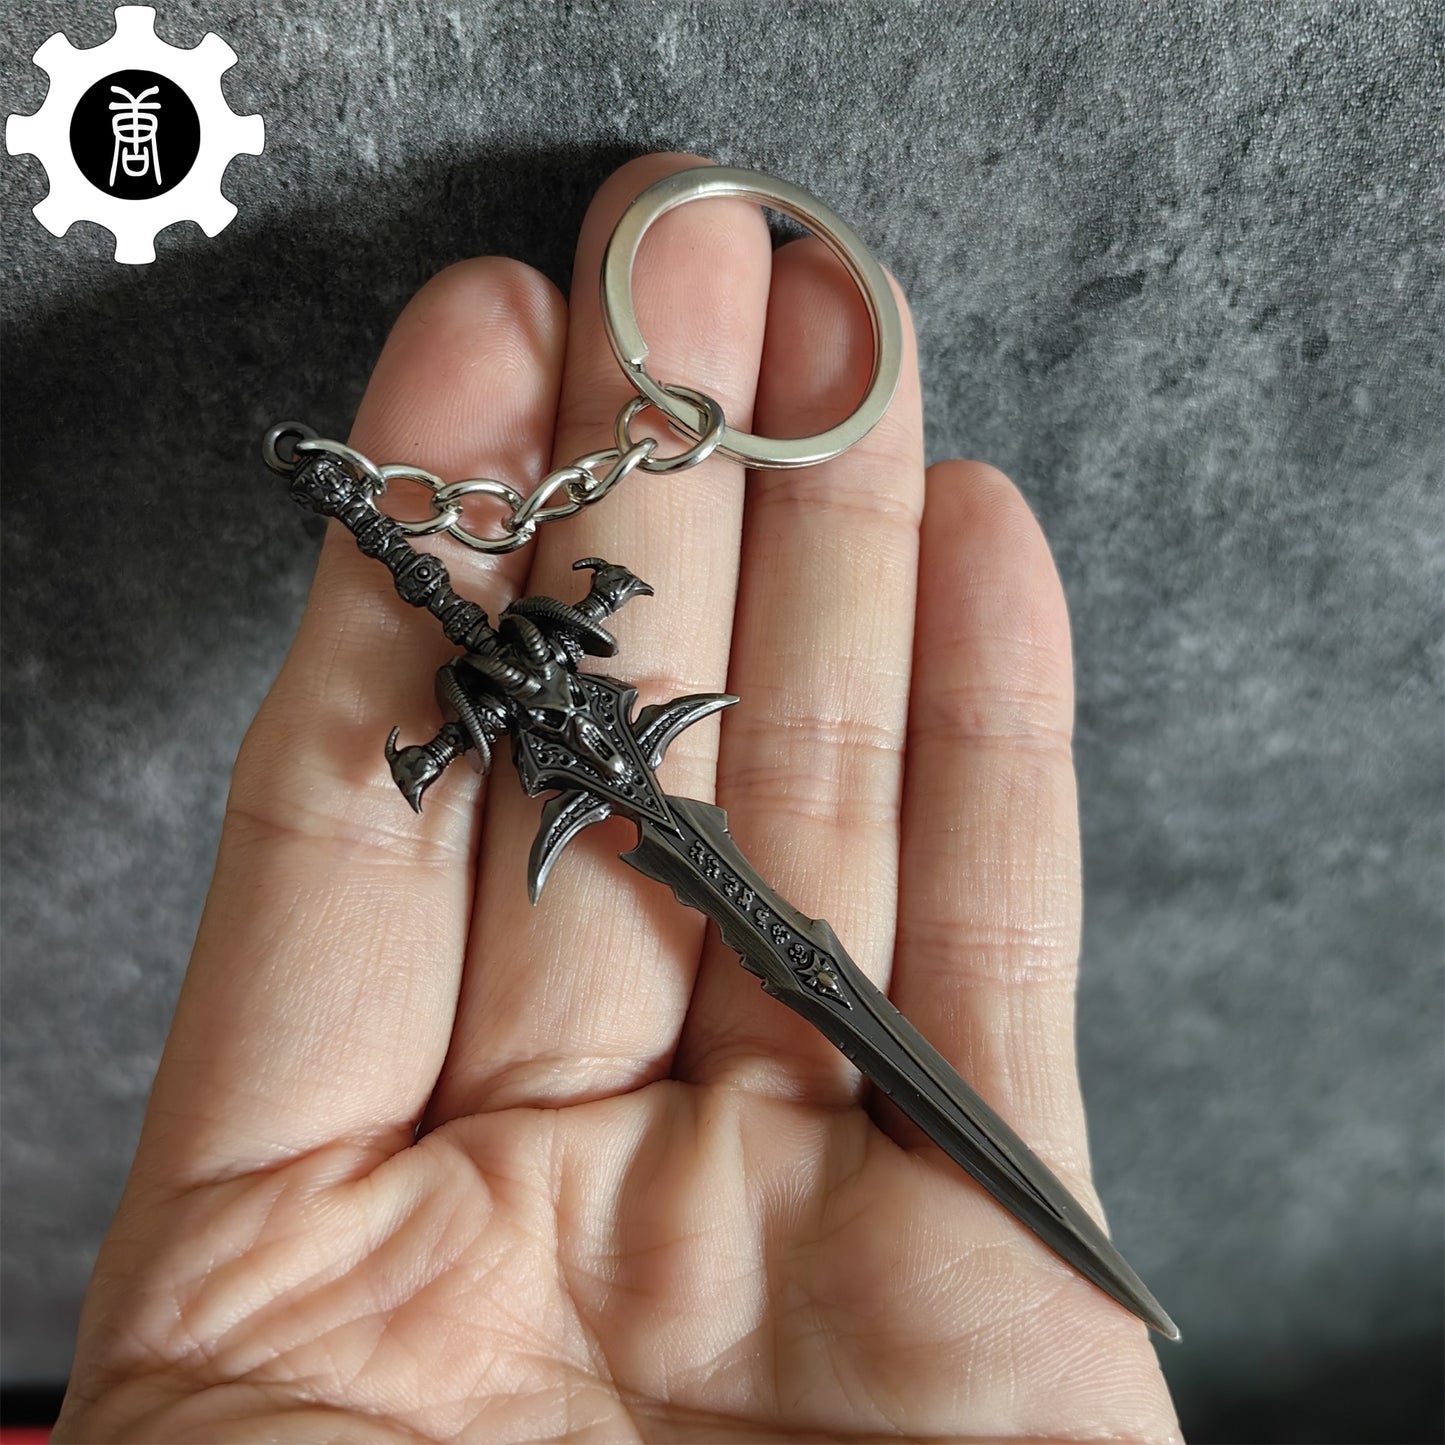 WOW Metal Mini Weapons Keychain Pendant 6 In 1 Pack